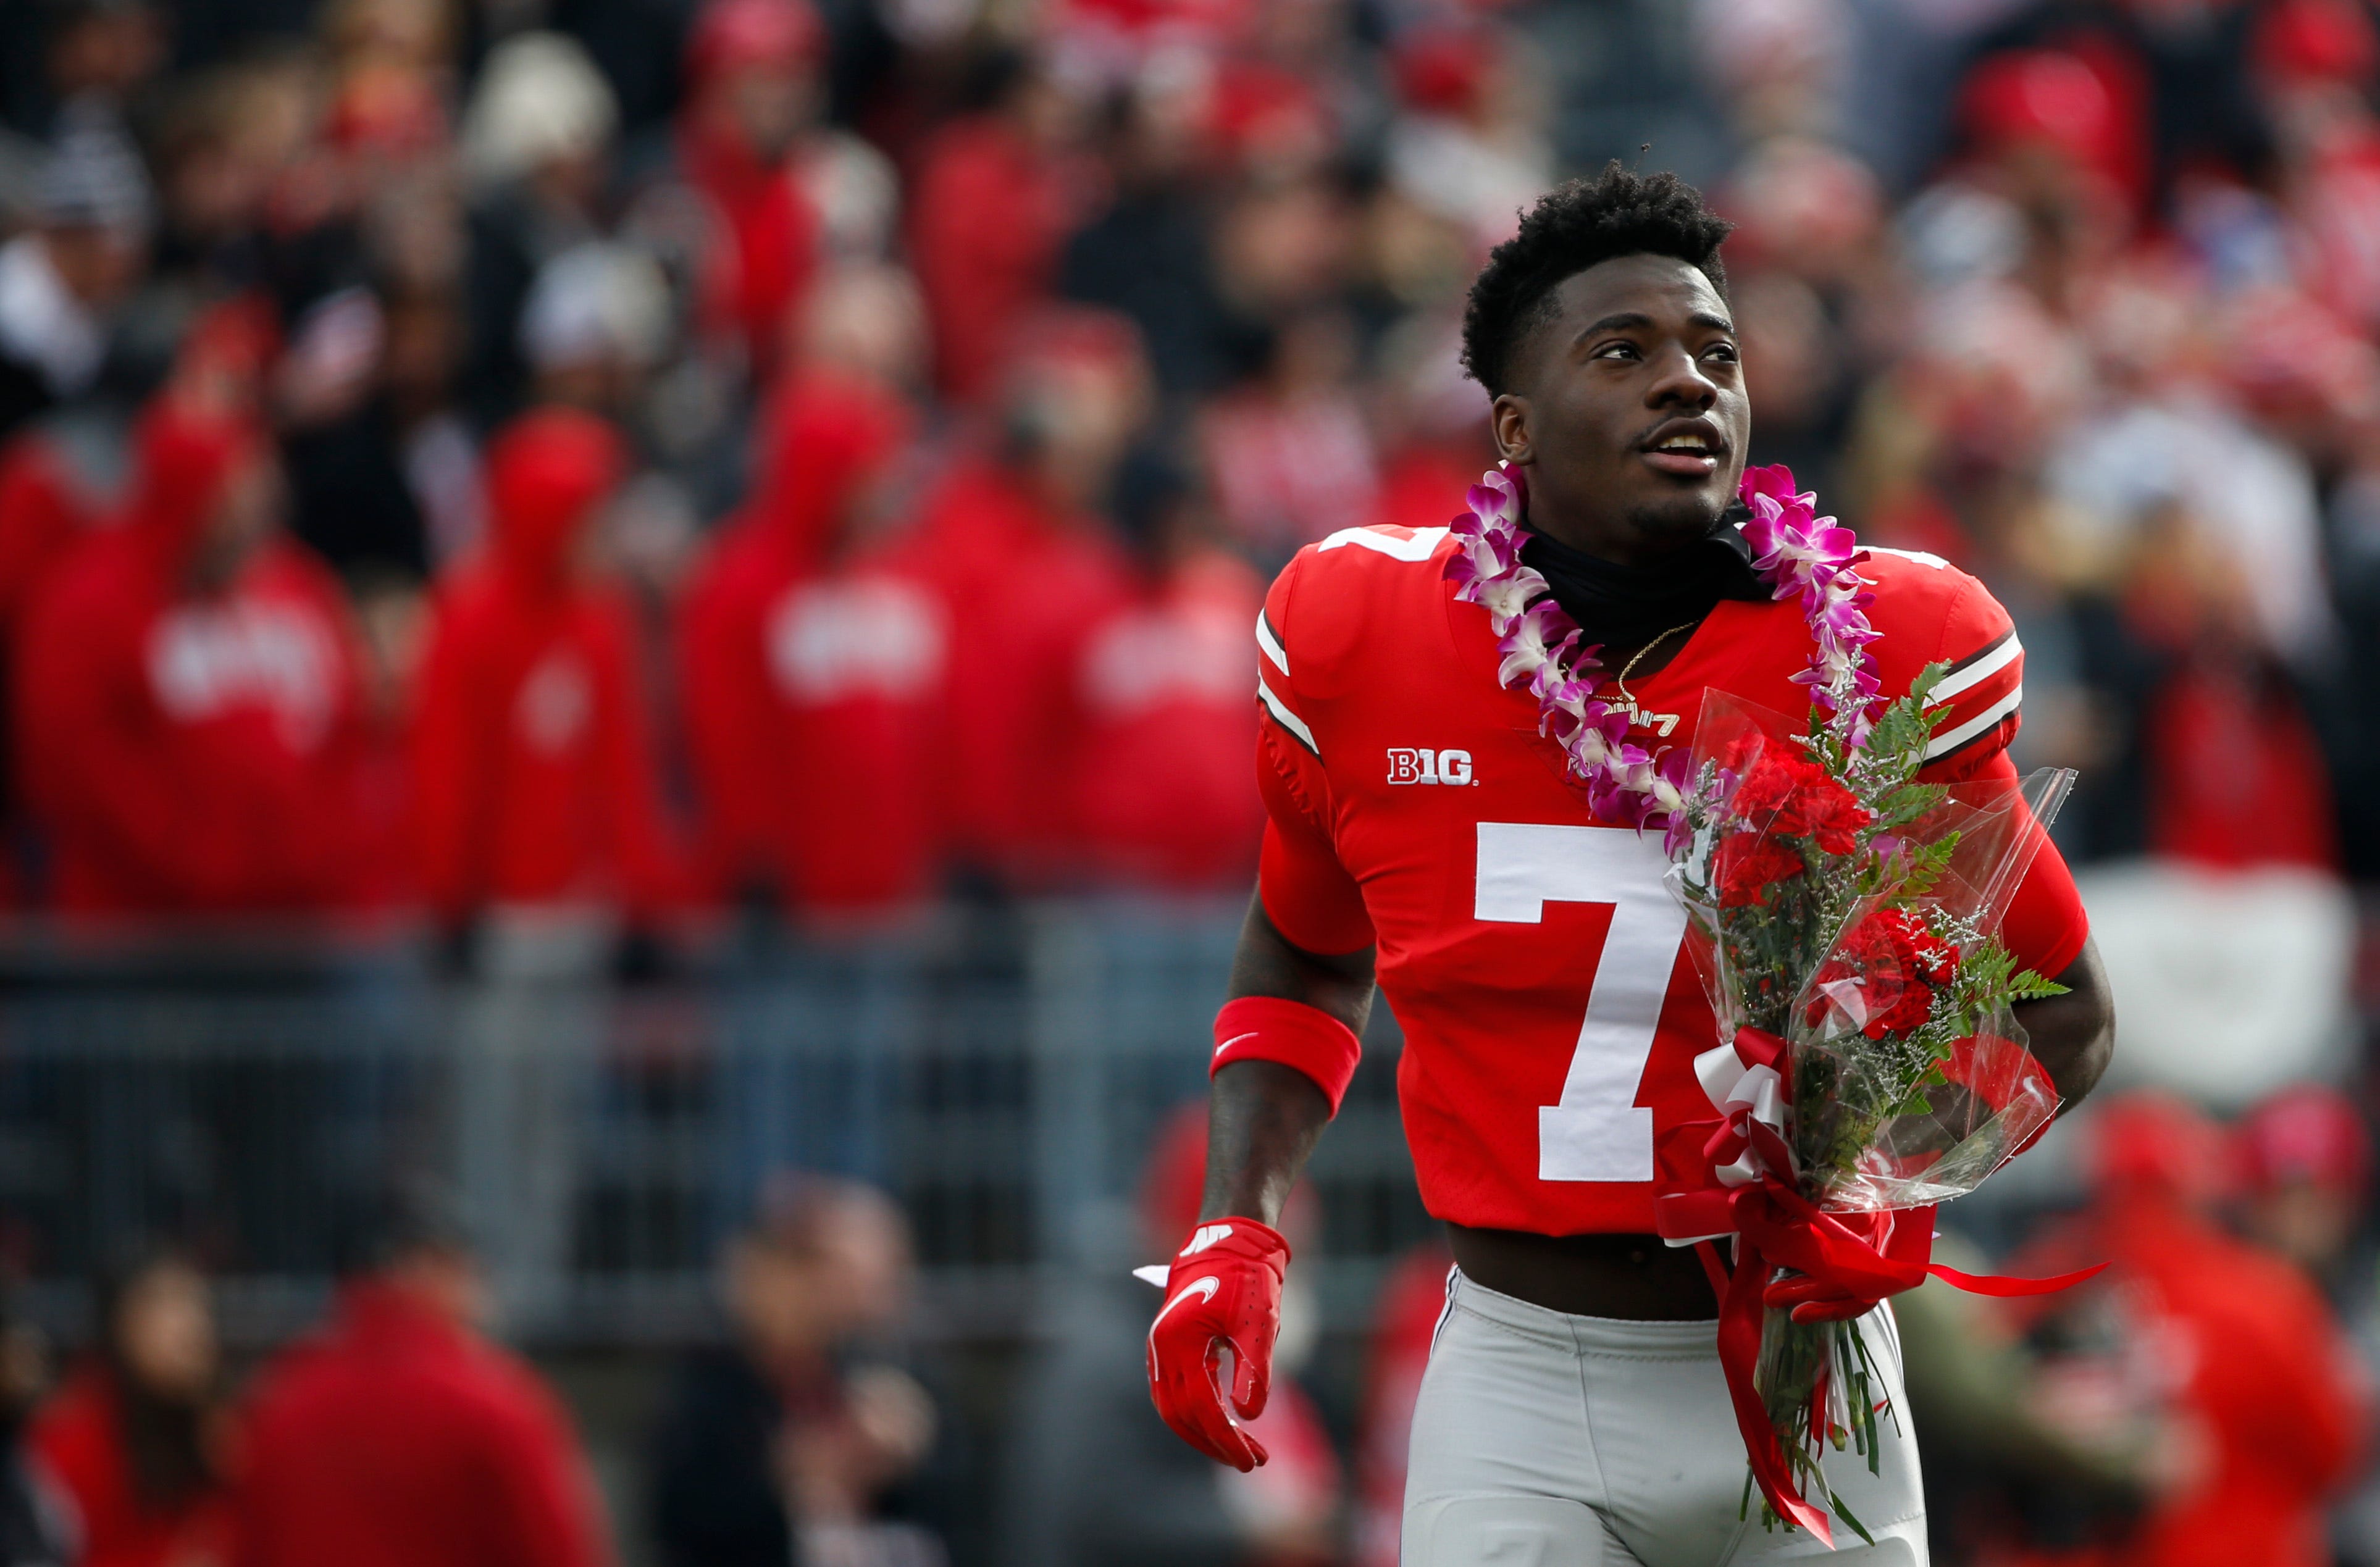 Ohio State Buckeyes cornerback Sevyn Banks looks to the stands as he runs onto the field following his Senior Day introduction before a NCAA Division I football game between the Ohio State Buckeyes and the Michigan State Spartans at Ohio Stadium.&nbsp;